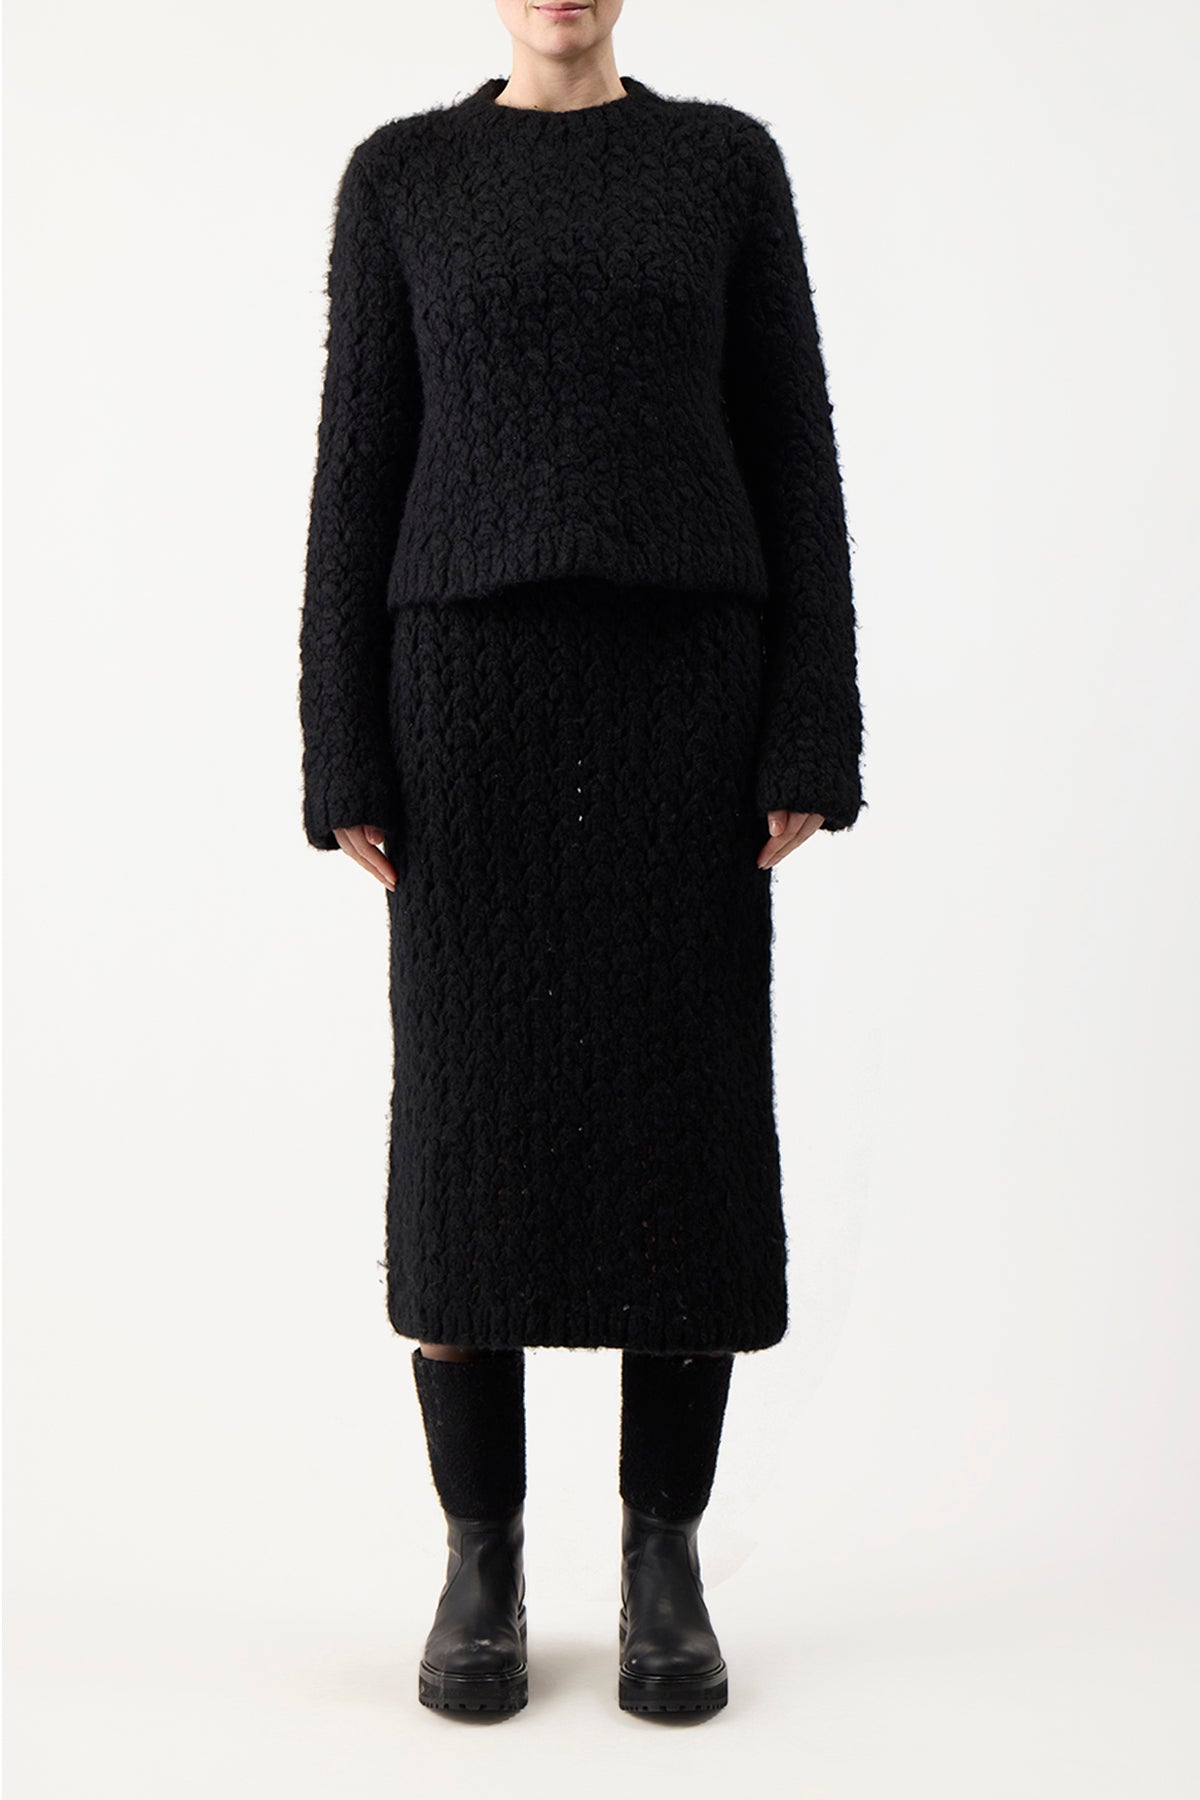 Bower Knit Sweater in Black Welfat Cashmere